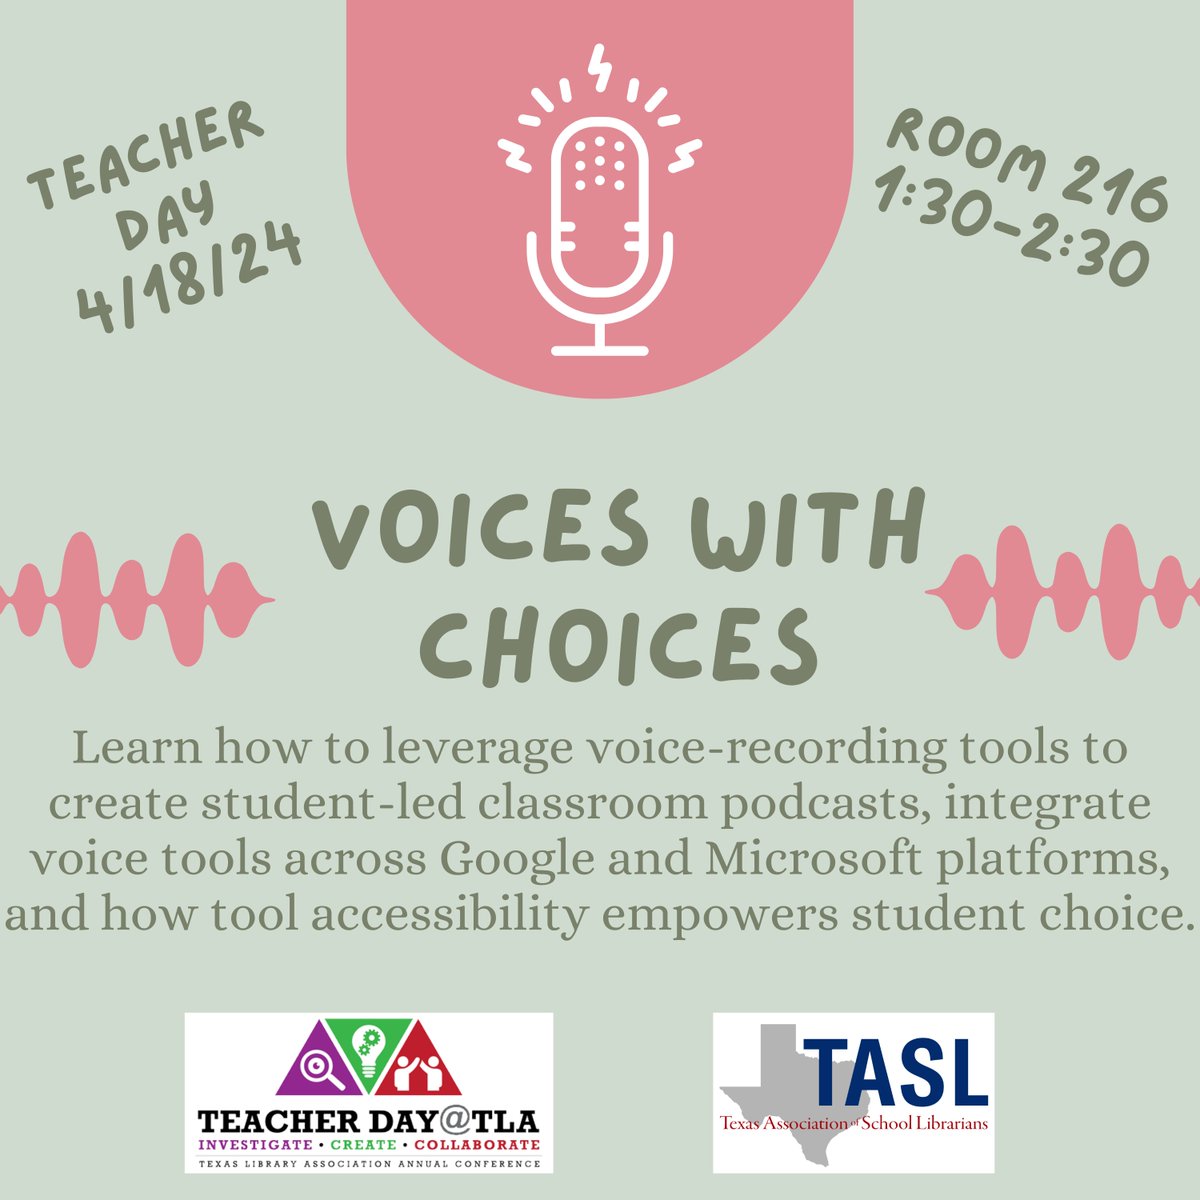 Teacher Day attendees 📣 - learn how to leverage podcast tools to empower student voice and choice in this session, Voices with Choices, at 1:30 on 4/18 Room 216 #TDTLA24 @TxASL @TXLA #TxLA24